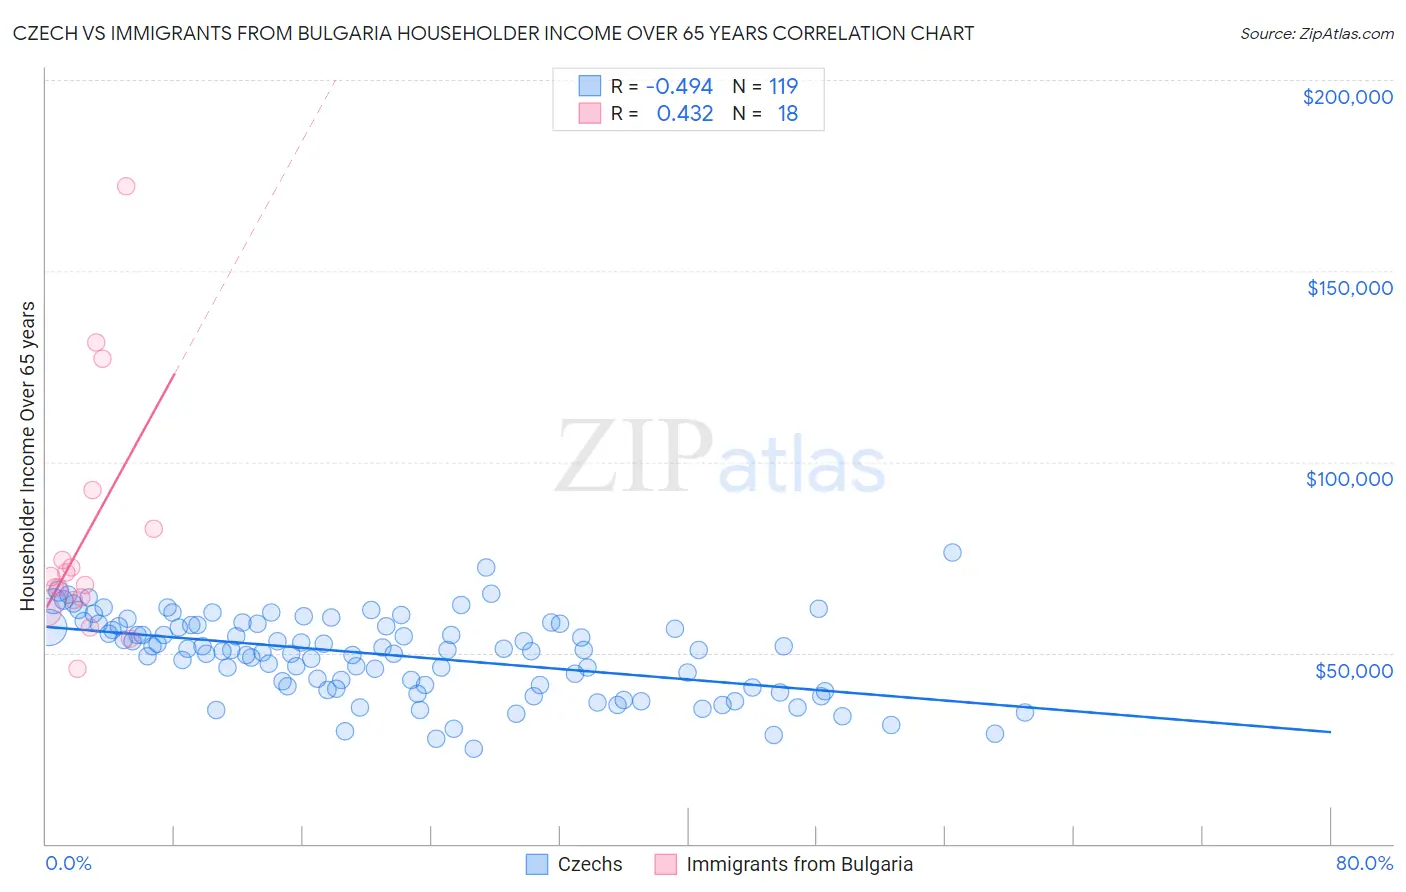 Czech vs Immigrants from Bulgaria Householder Income Over 65 years